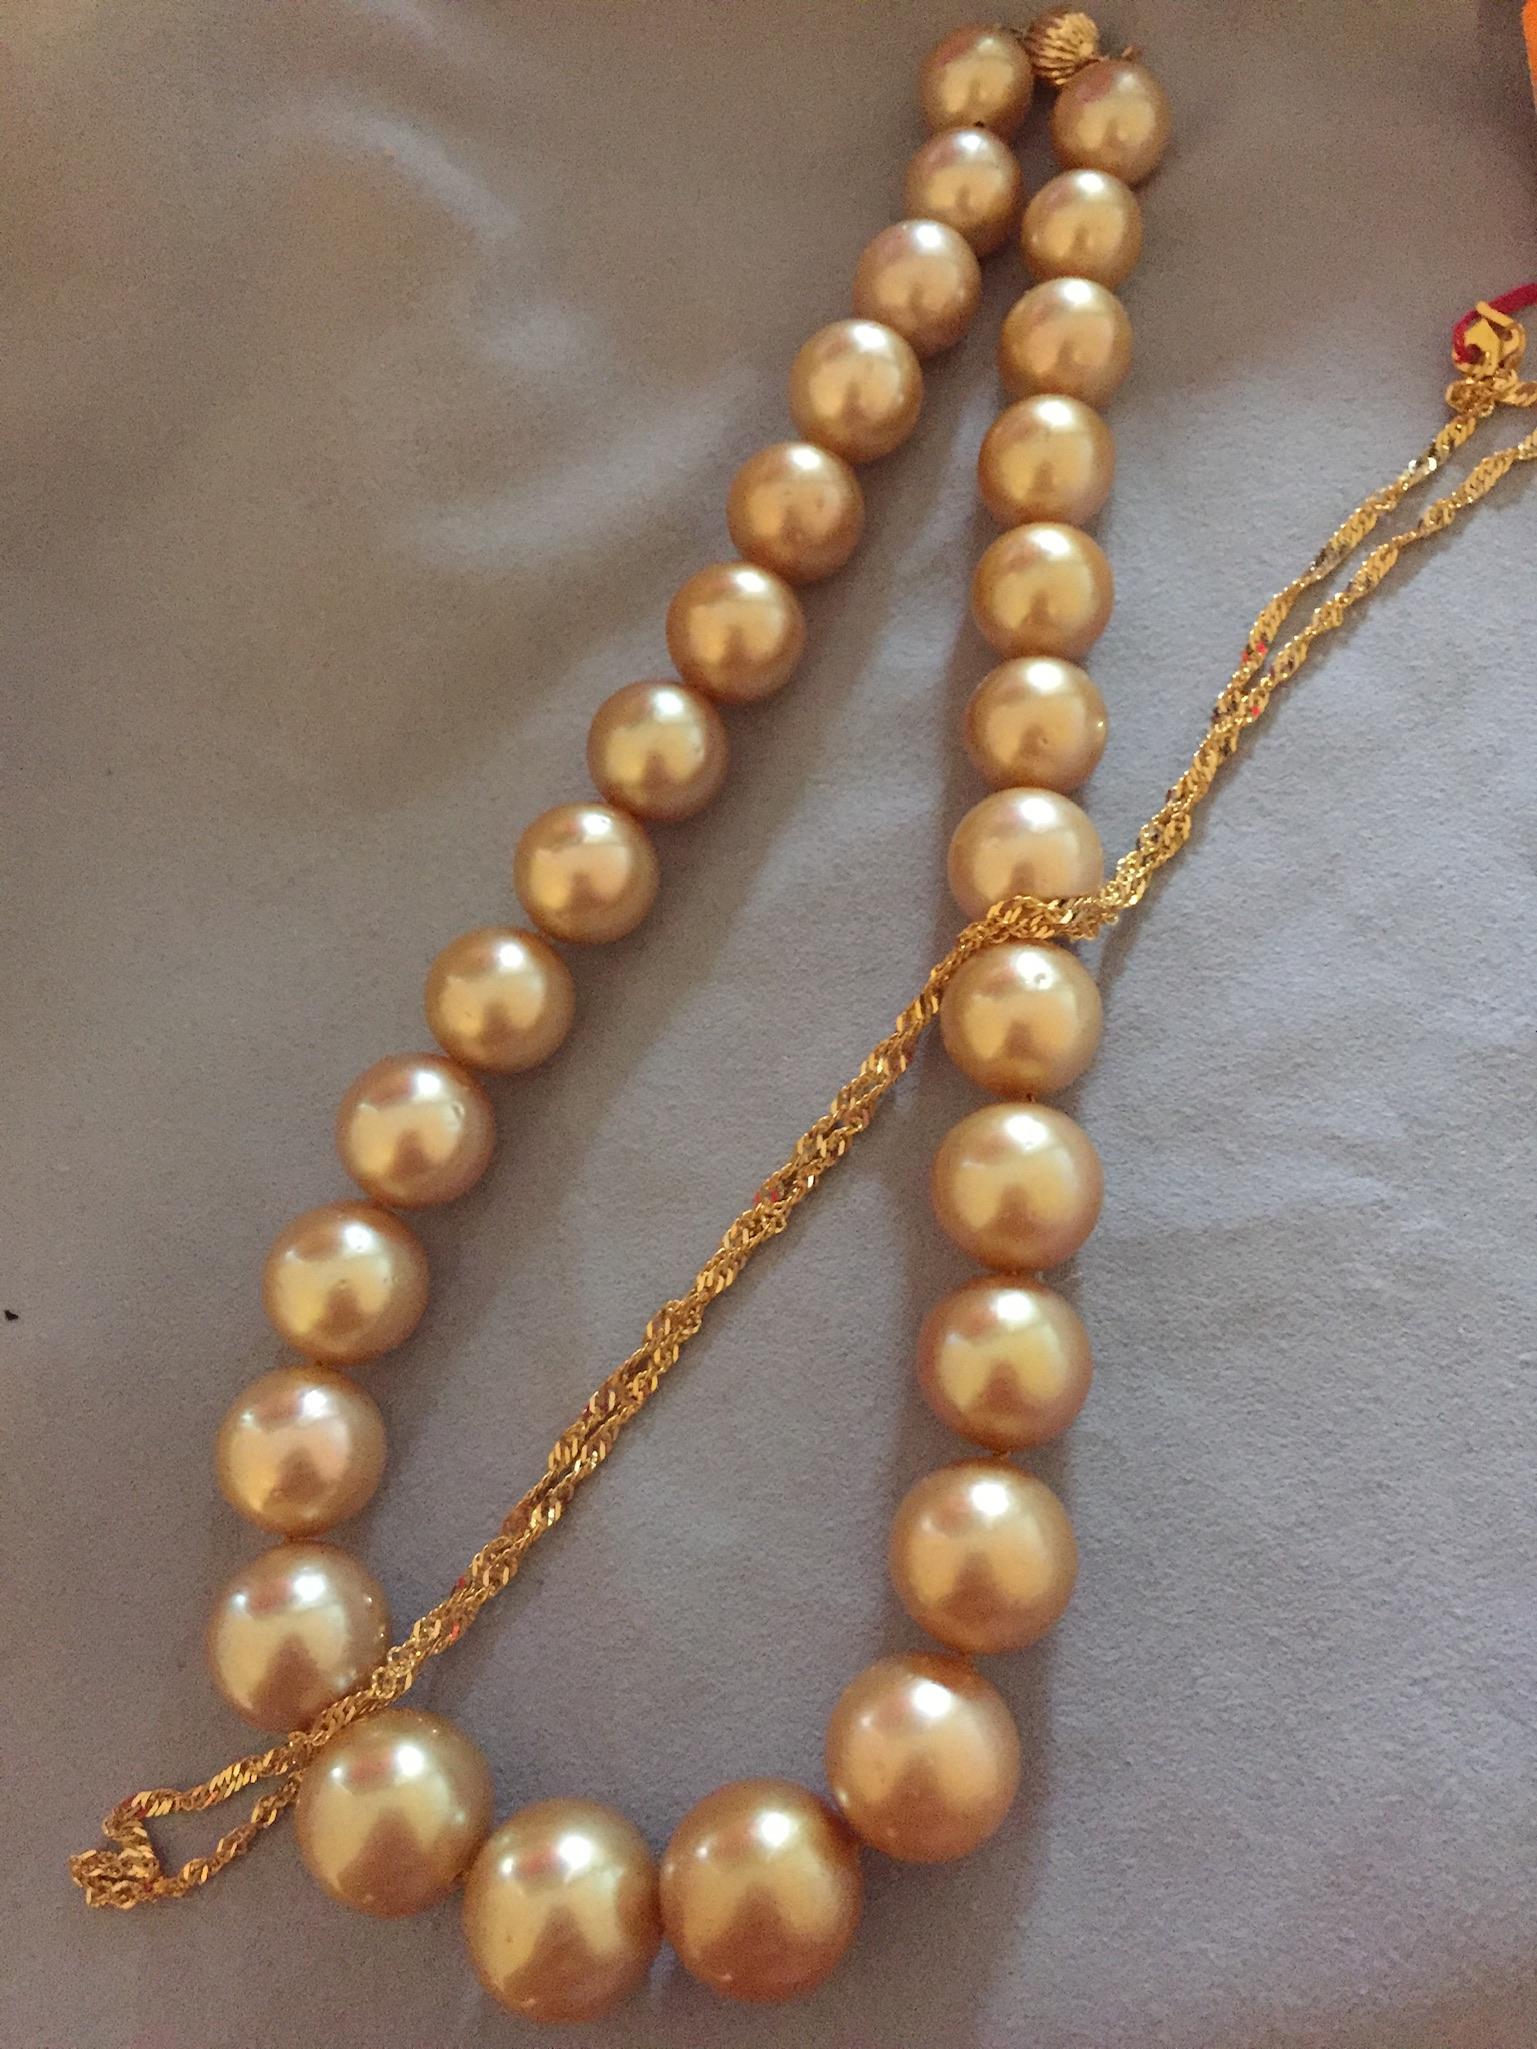 This is an impressive Deep Golden South Sea Pearl Necklace with 18K Ruby and Diamond Clasp. The pearls are 12mm-16mm in size and it comes with a 18K Ruby and Diamond Clasp. The ruby is 